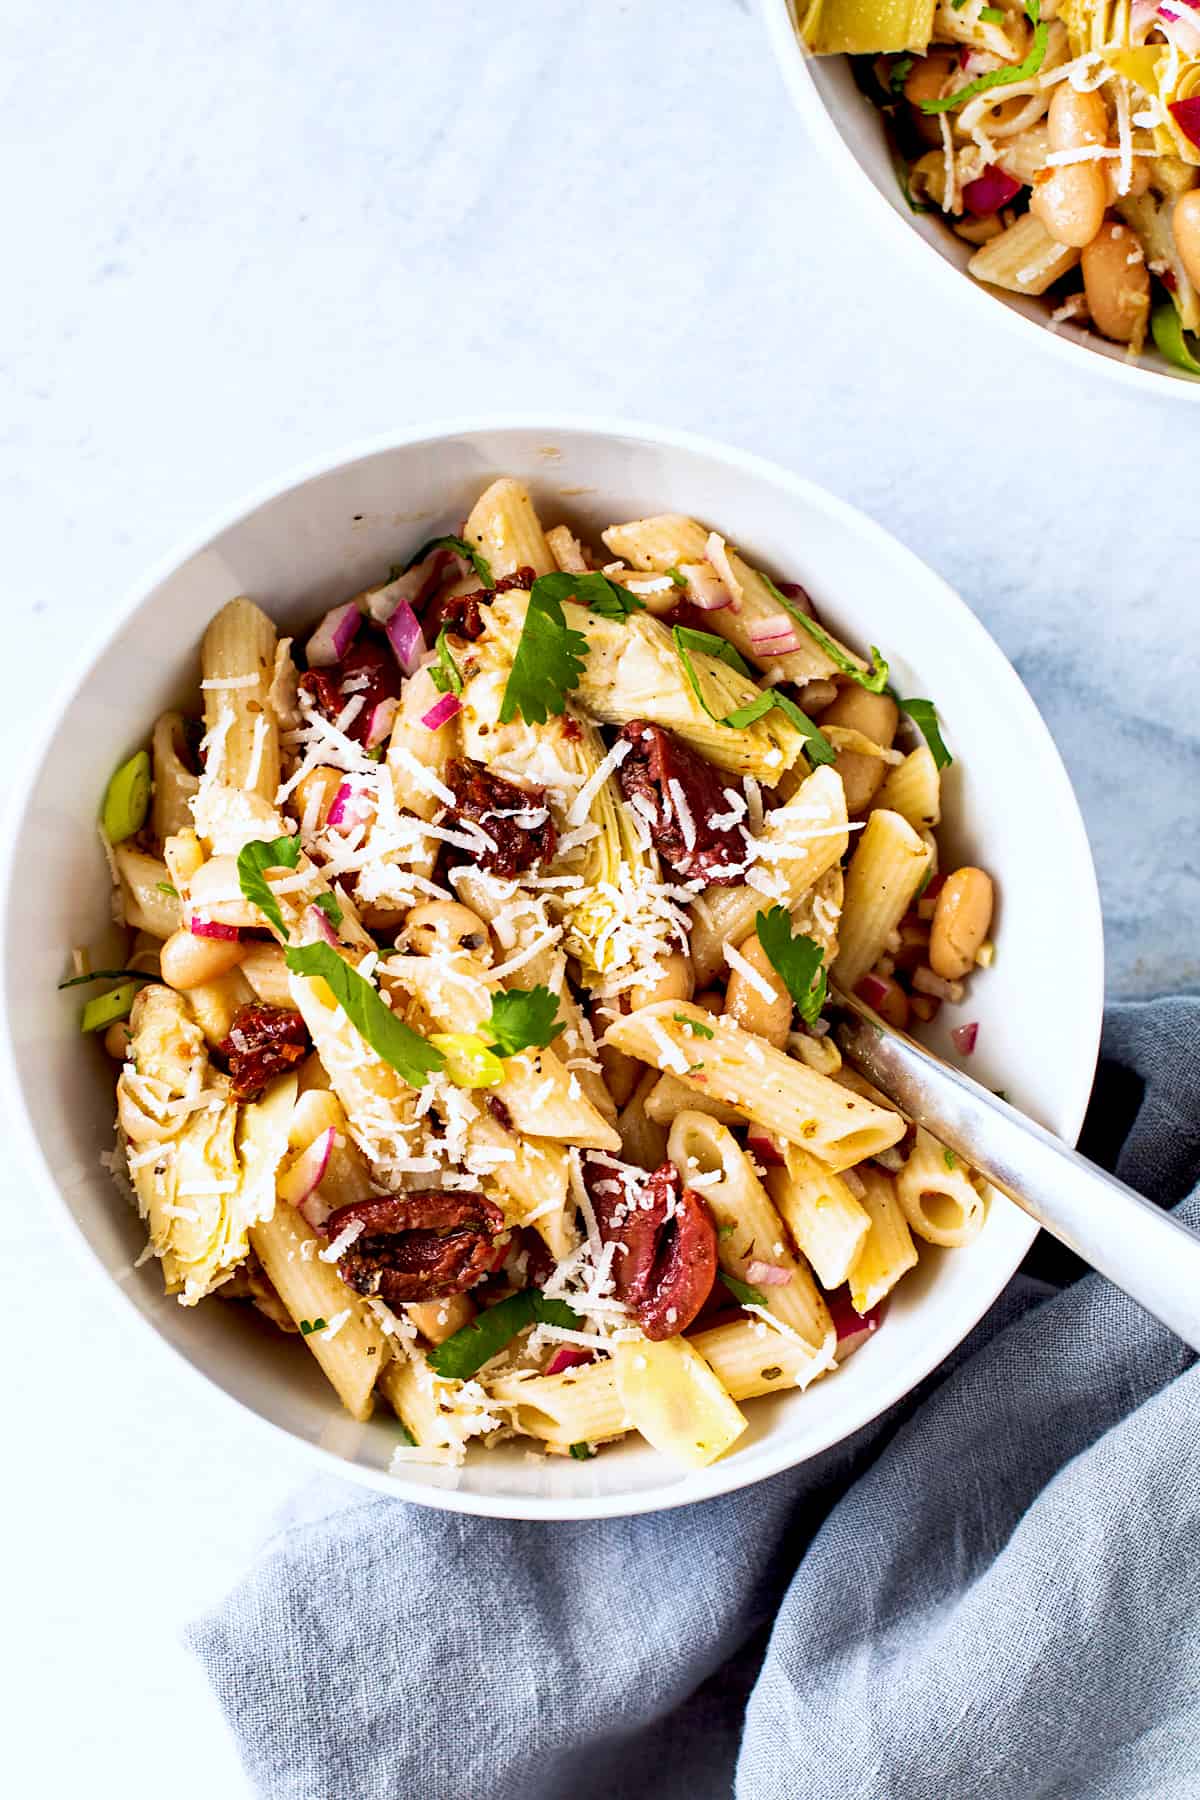 Pasta salad with olives and artichokes in a bowl.